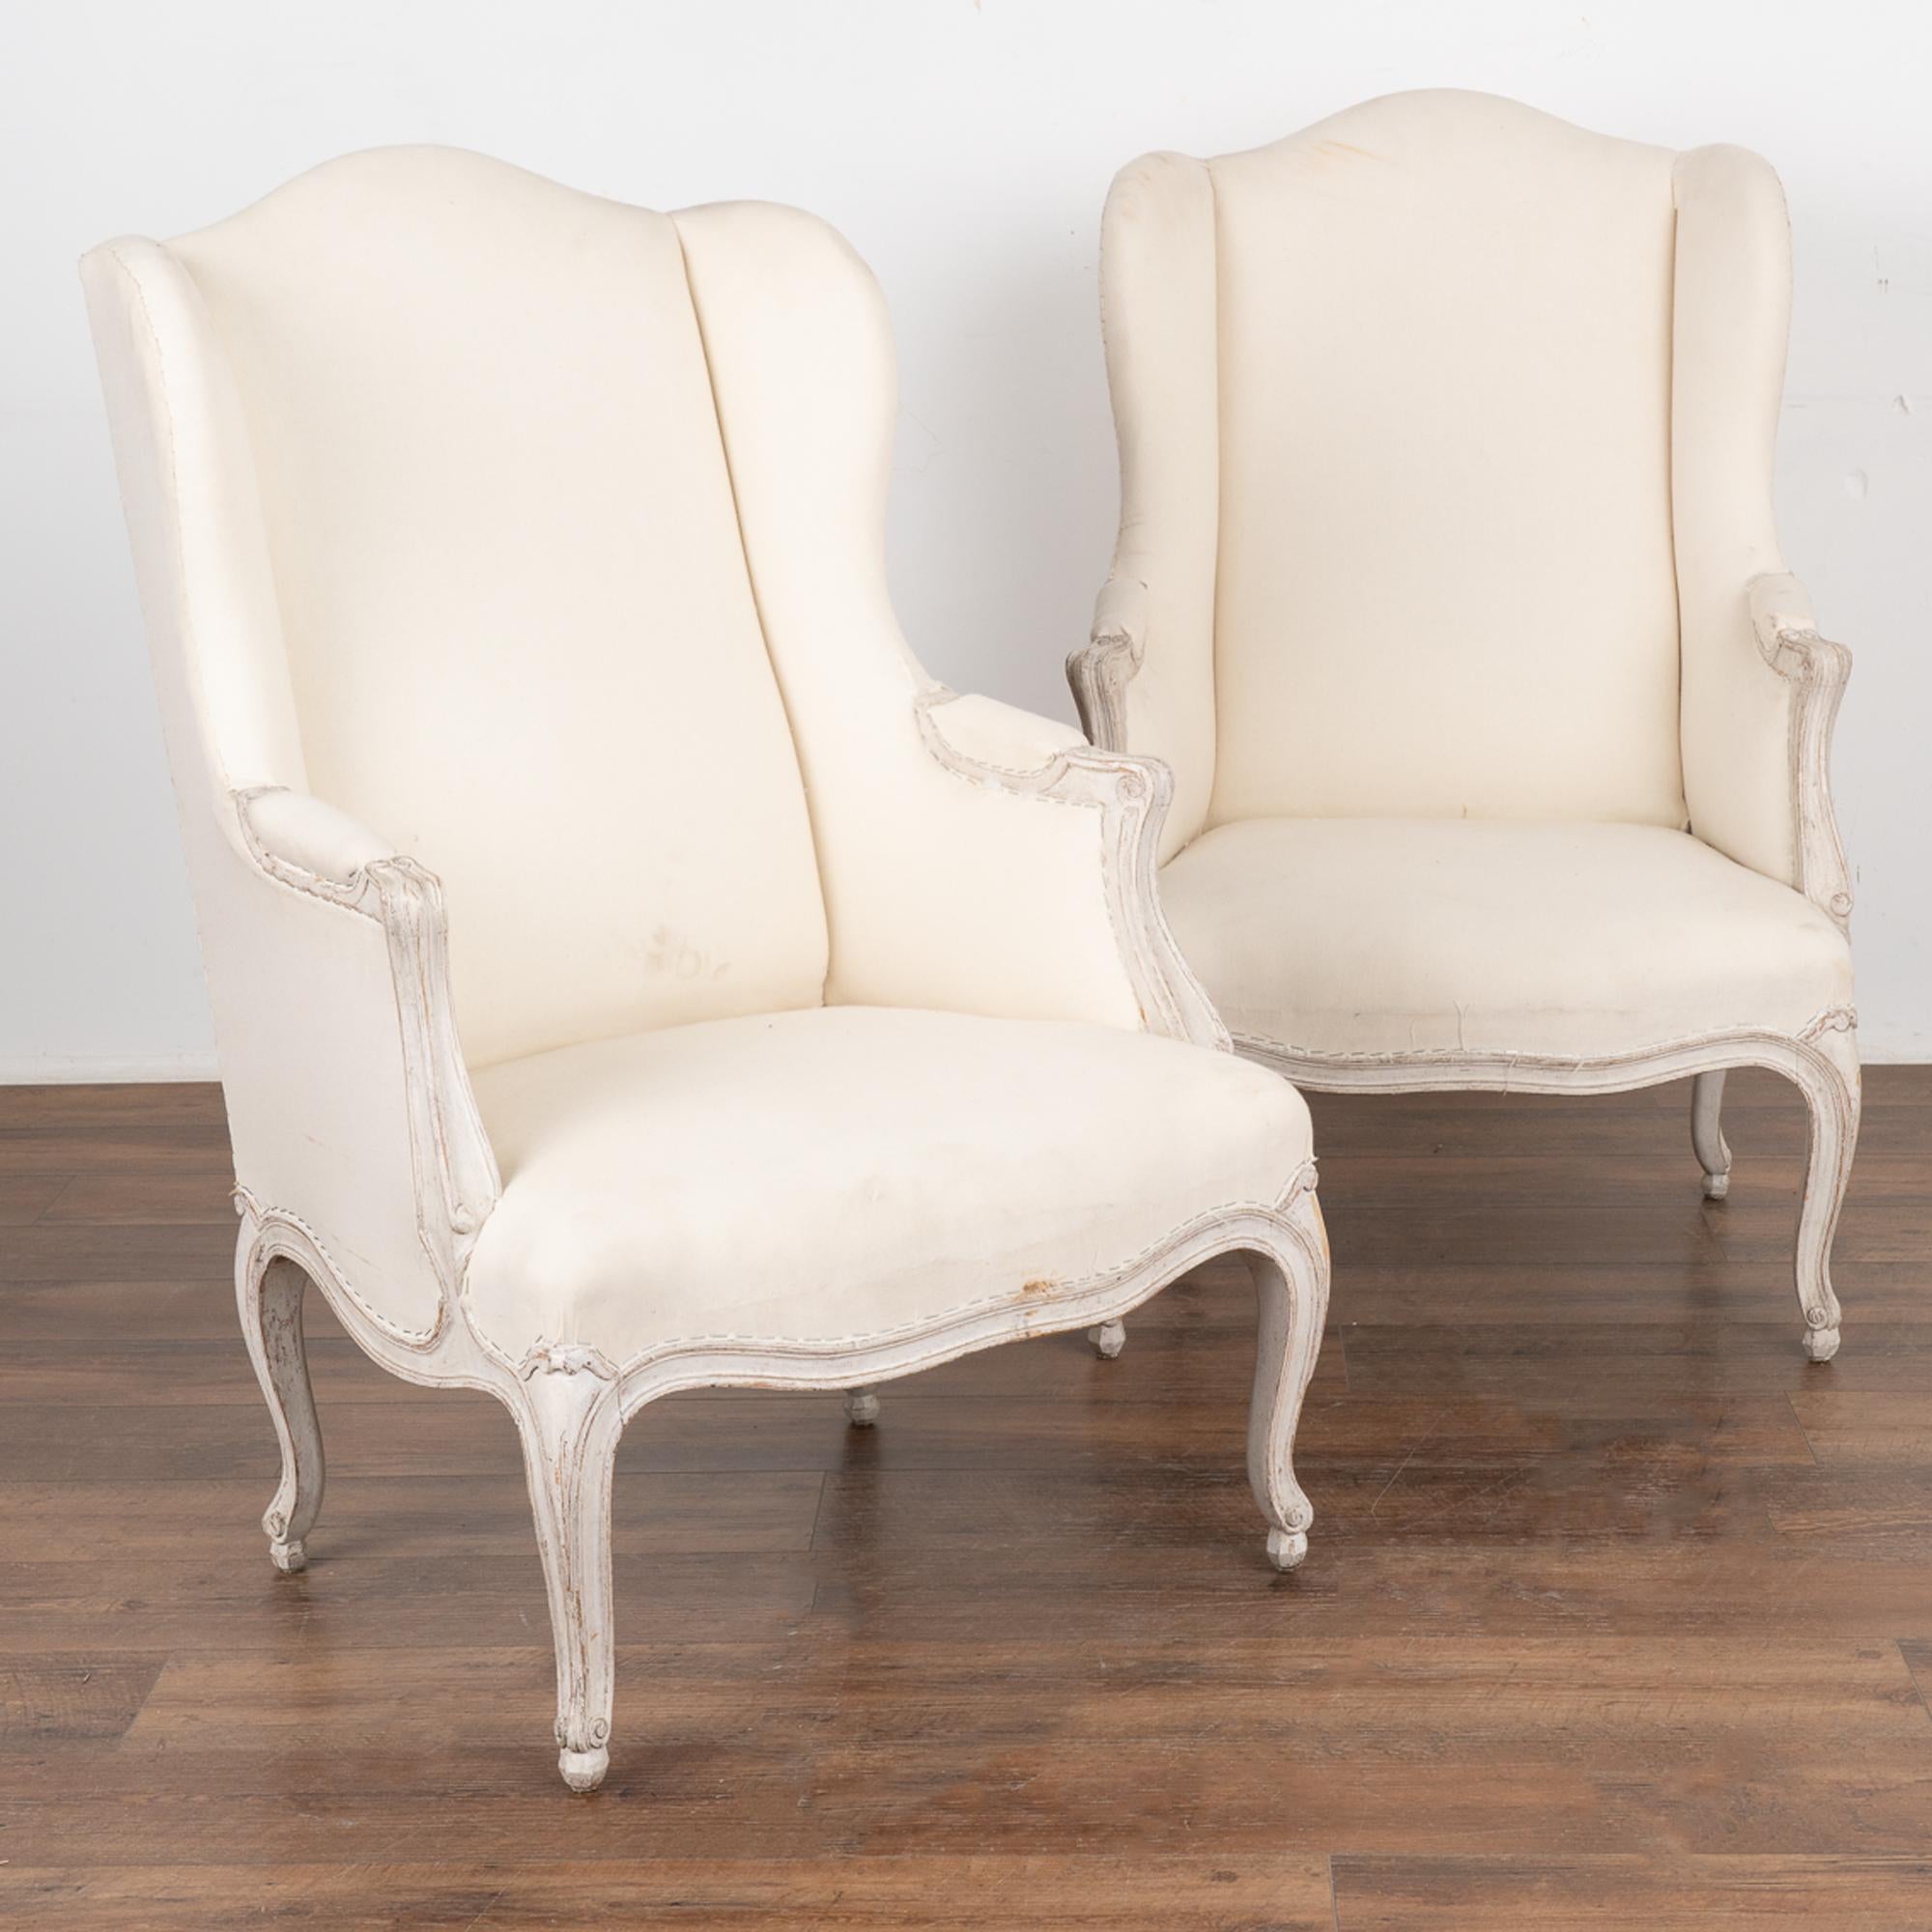 Graceful with a romantic air, this pair of Gustavian style wingback arm chairs still maintain their charming original white paint, lightly scraped revealing a warm patina of natural wood below. 
Simple linen upholstery on back, seat and arms has